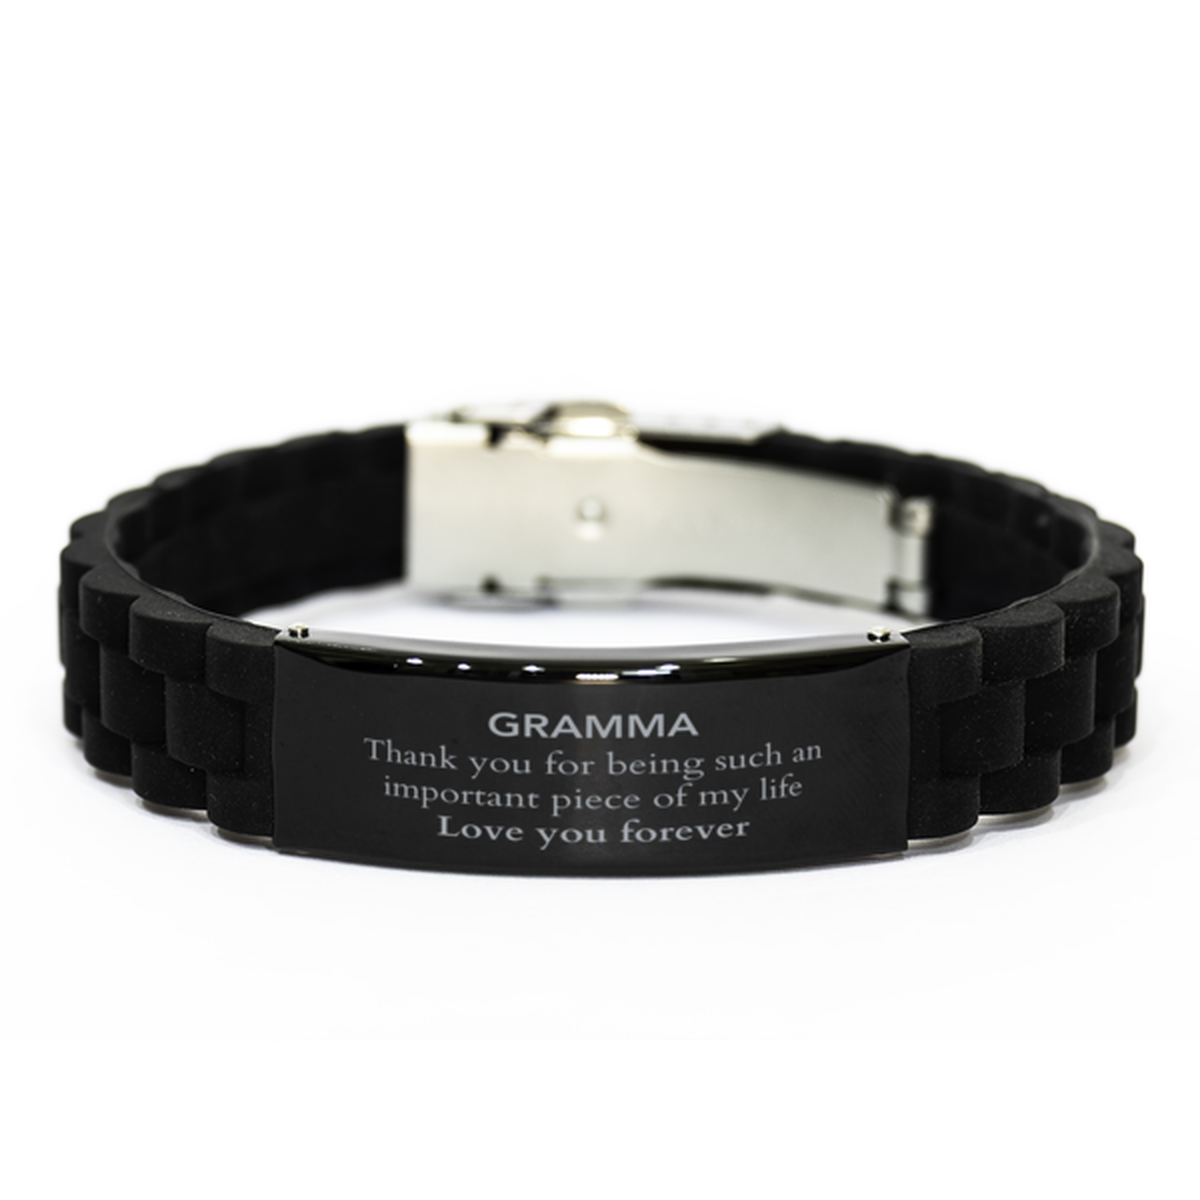 Appropriate Gramma Black Glidelock Clasp Bracelet Epic Birthday Gifts for Gramma Thank you for being such an important piece of my life Gramma Christmas Mothers Fathers Day